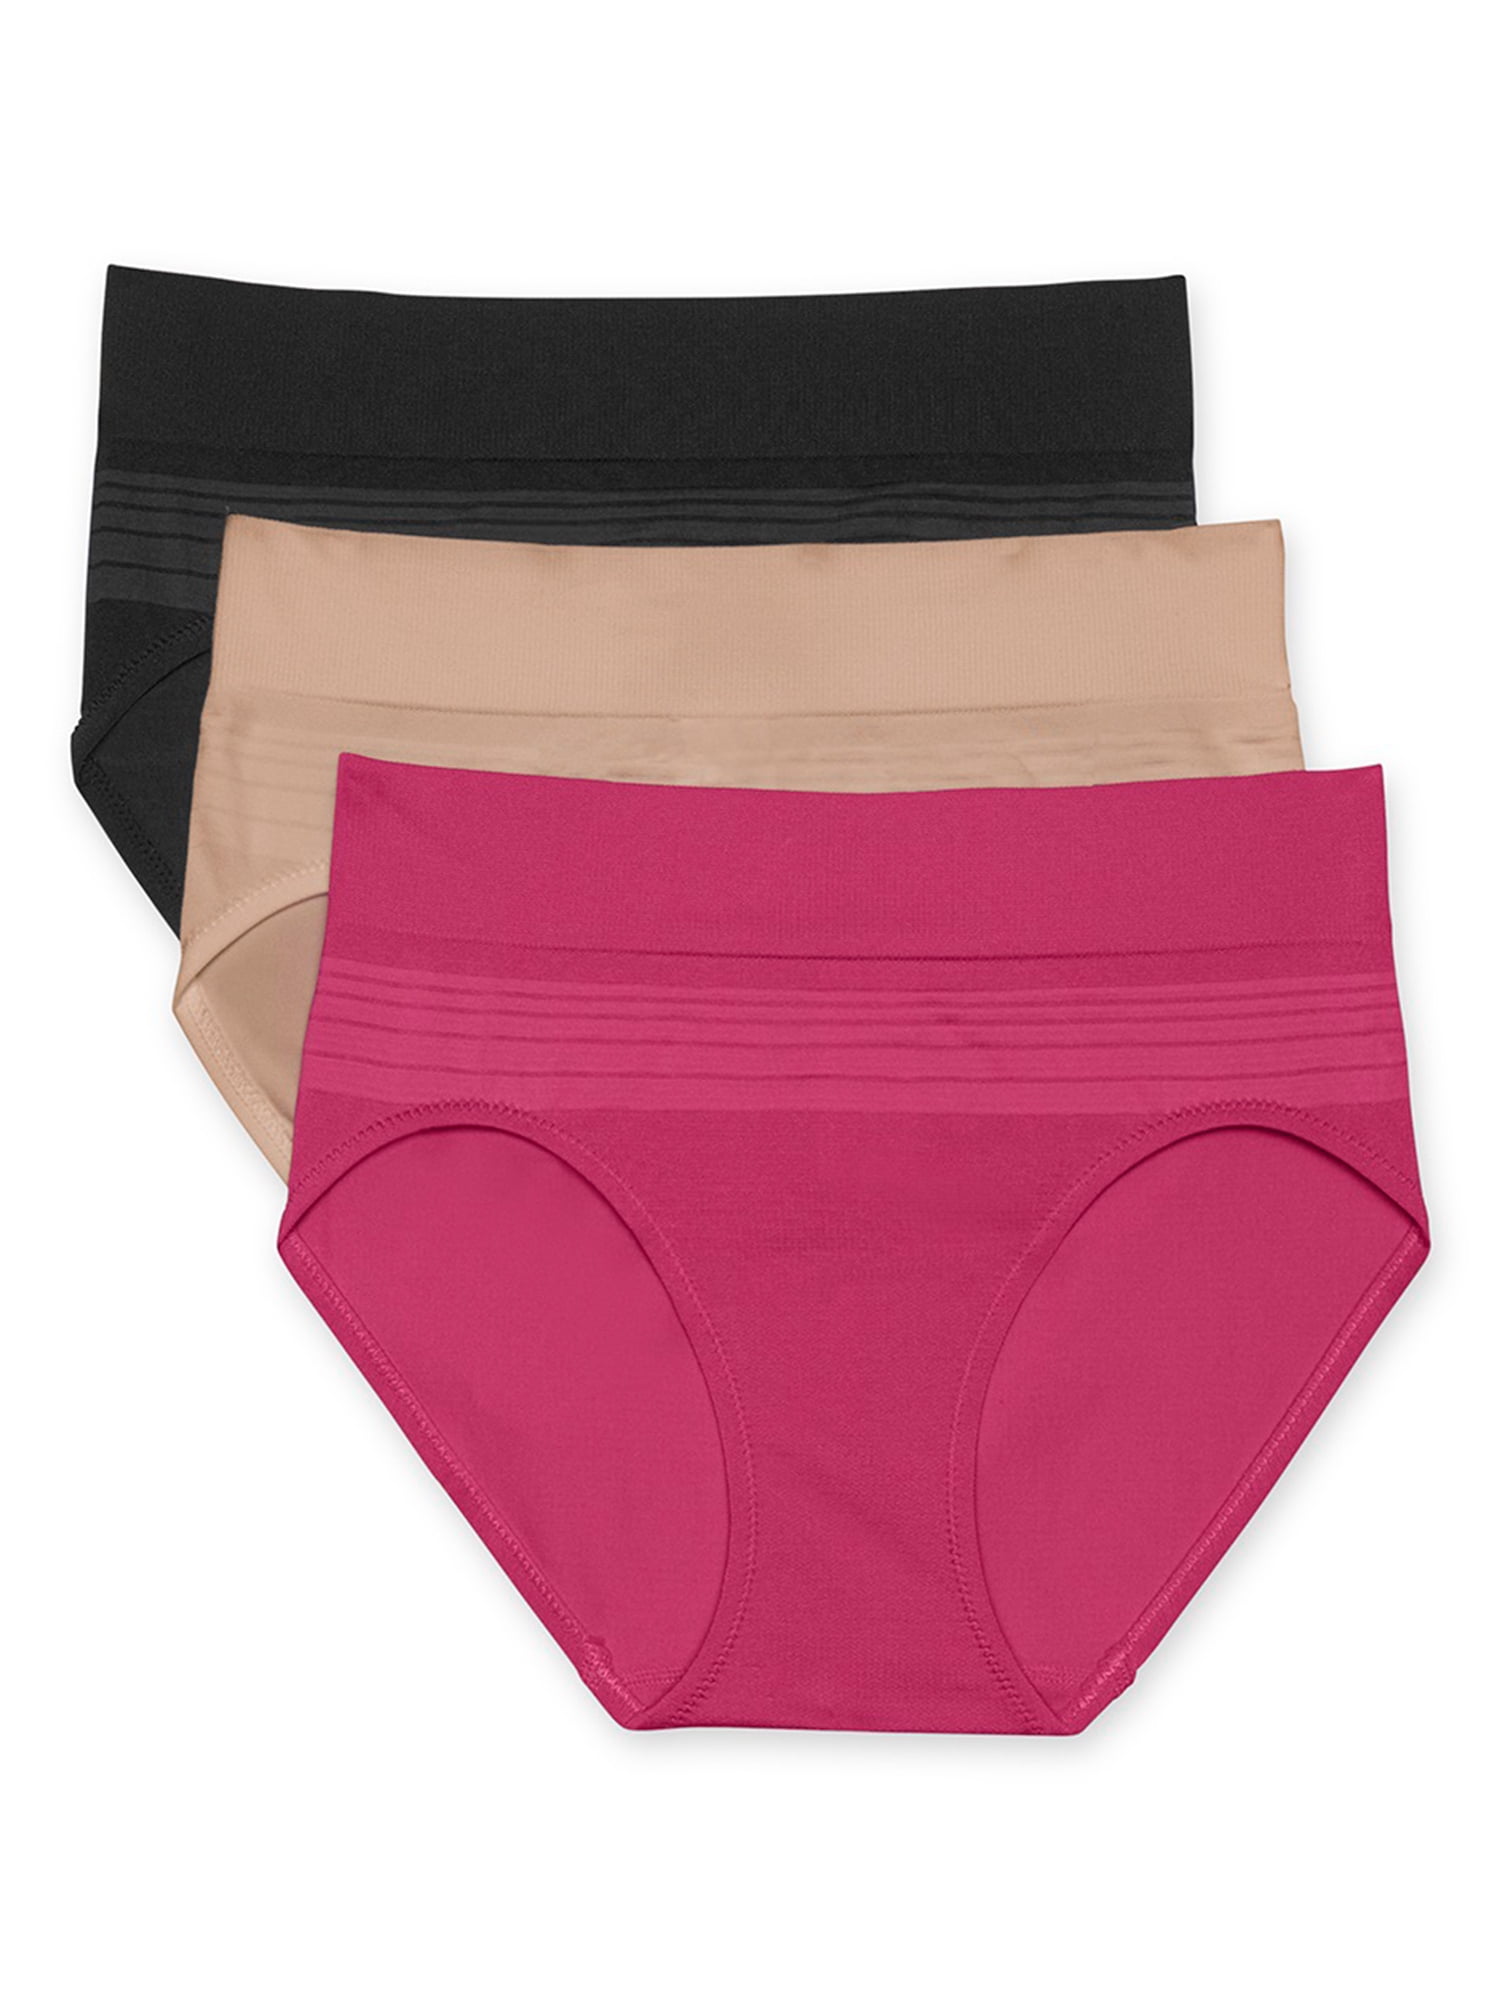 Warners Blissful Benefits Dig-Free Seamless Brief 3-Pack RS6333W 